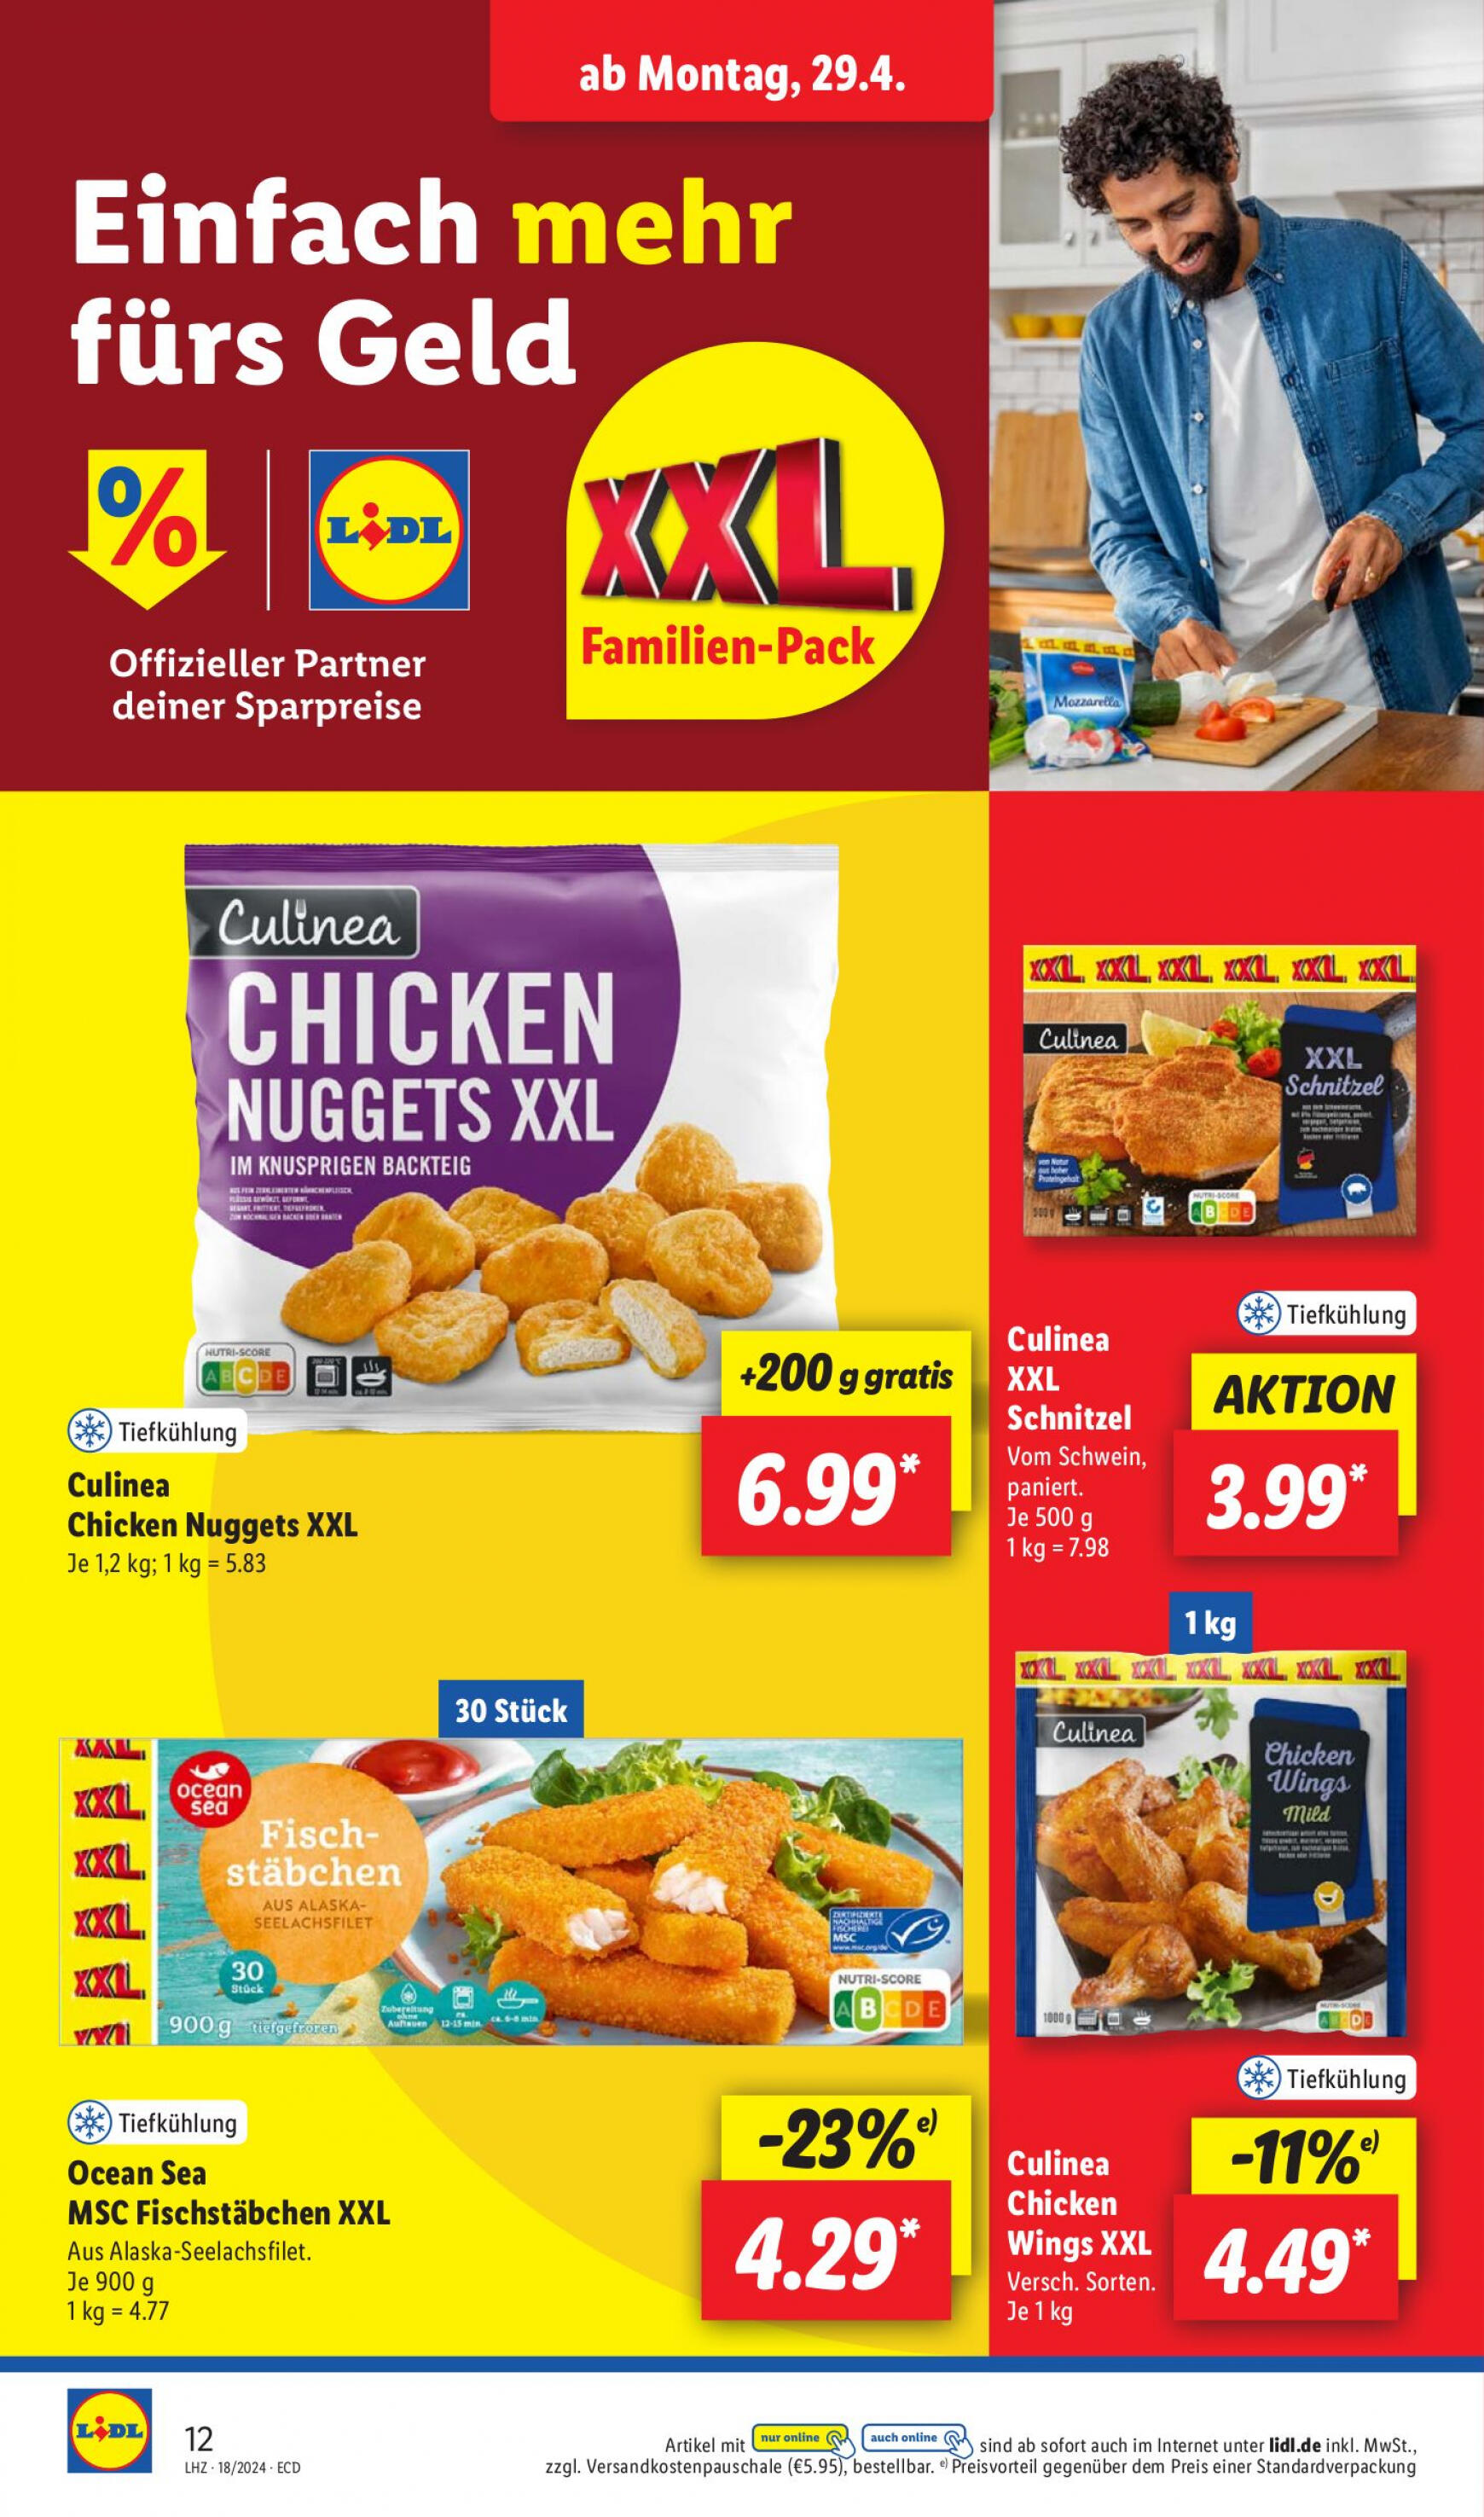 lidl - Flyer Lidl aktuell 29.04. - 04.05. - page: 16